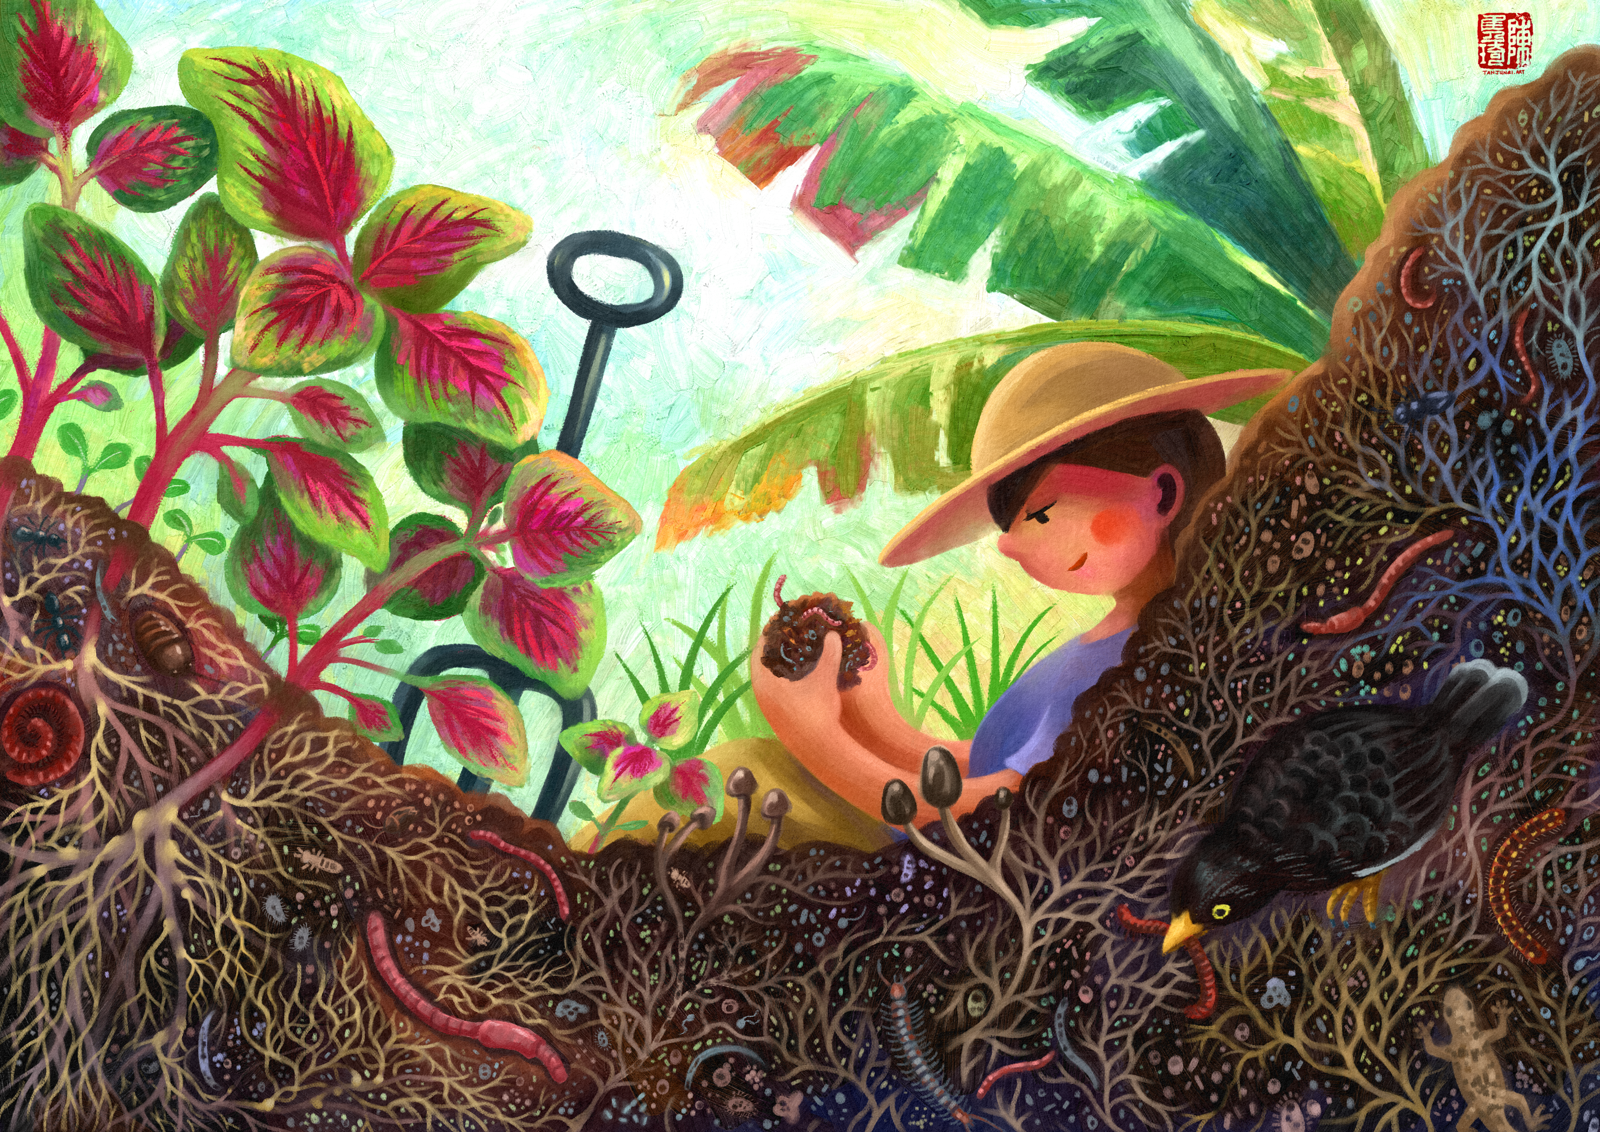 Digital painting of a person in a lilac shirt and khaki cargo pants wearing a beige farmer hat sitting on the ground leaning against a pile of soil/compost. She is holding a small lump of compost in her hands which is teeming with life like earthworms and insects. There chives growing behind her and banana leaves in the background overhead, as well as red bayam growing on the left, interspersed with some kailan seedlings. The roots of the plants can be seen going into the soil/compost which is teeming with biology (though not drawn to scale), and connected to a vast mycorrhizal network that runs throughout. There are earthworms, amoebae, bacteria, nematodes, protozoans, microarthropods, arthropods like springtails centipedes, milipedes, ants, cockroaches, beetles, and higher predators like a Javan myna and a house gecko, as well as some mushrooms sprouting out of the soil